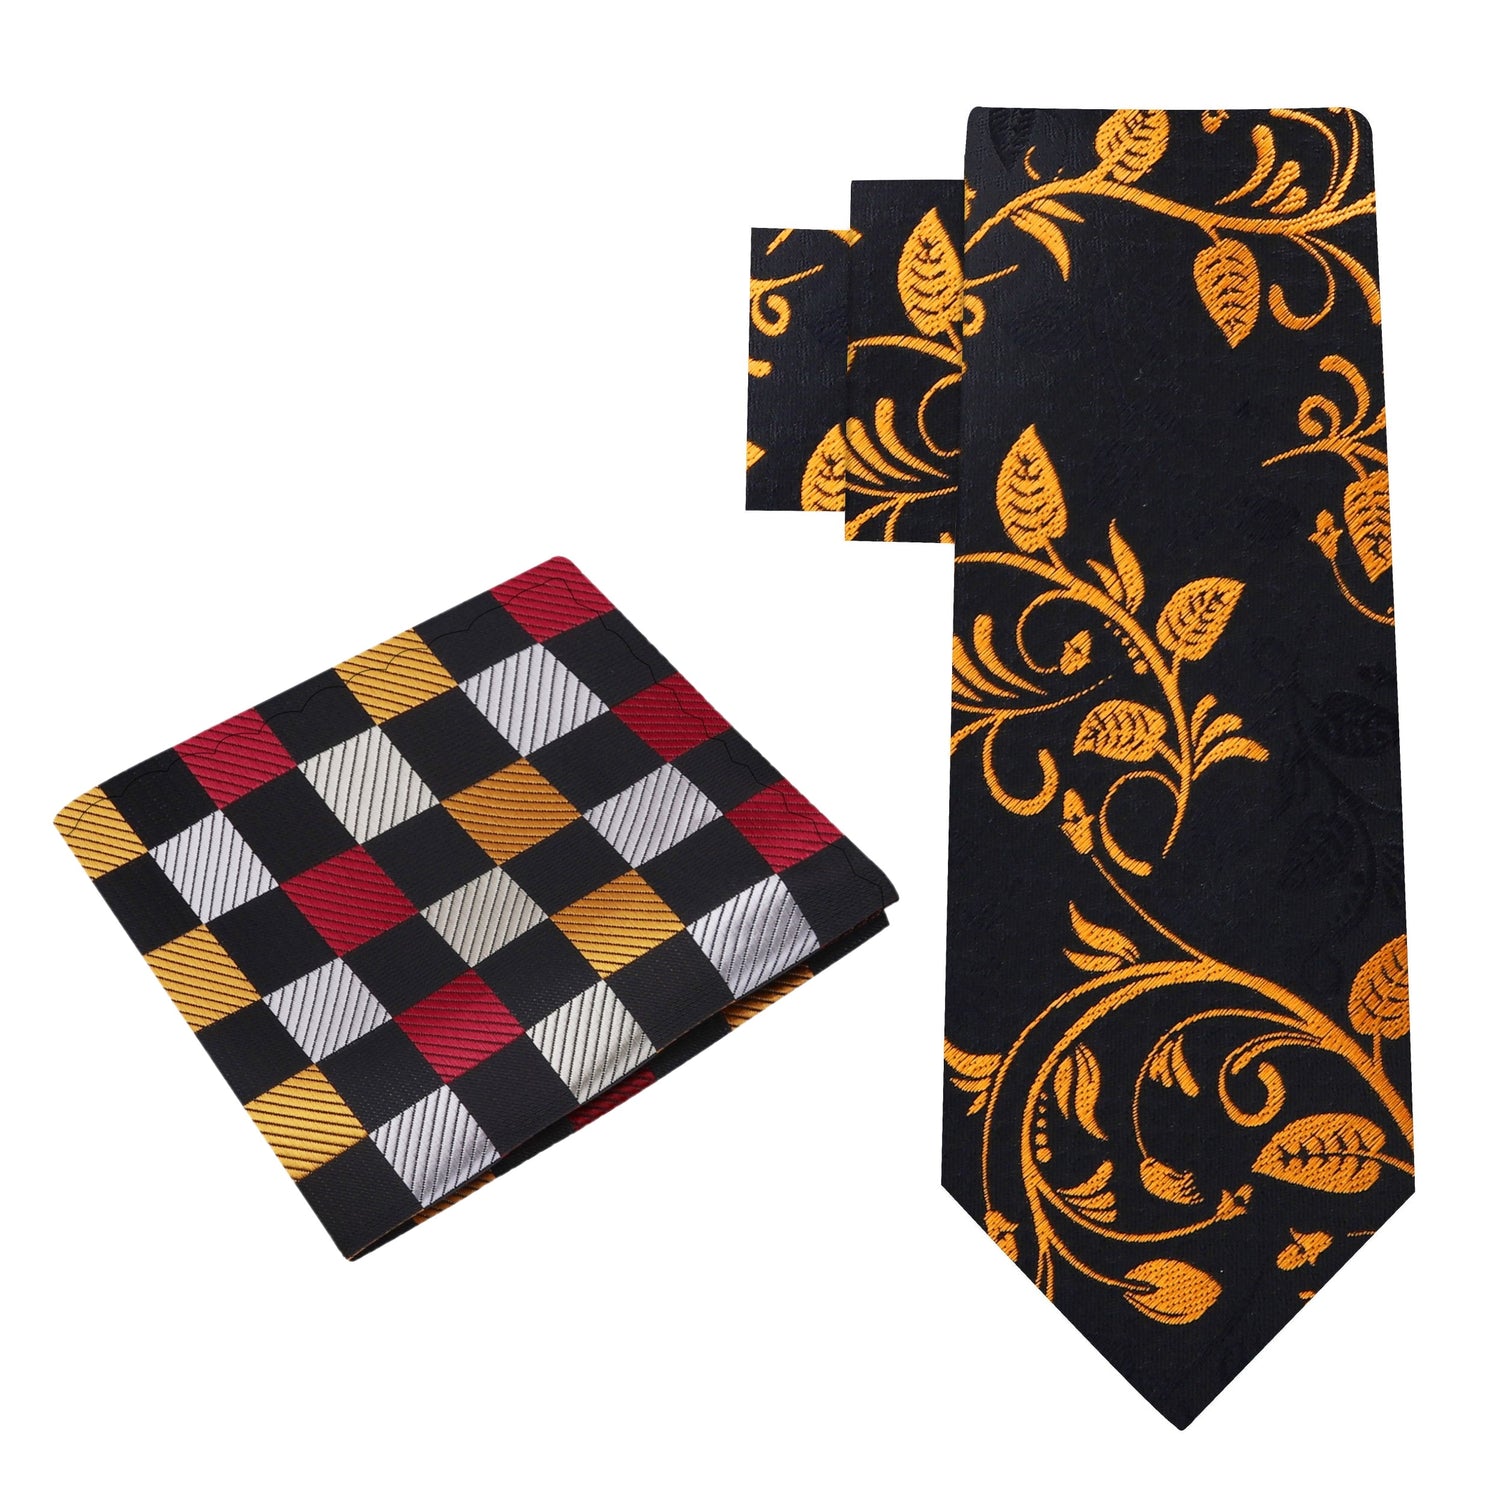 Alt View: Black and Gold Vines Tie with Black, Gold, Silver Burgundy Check Pocket Square